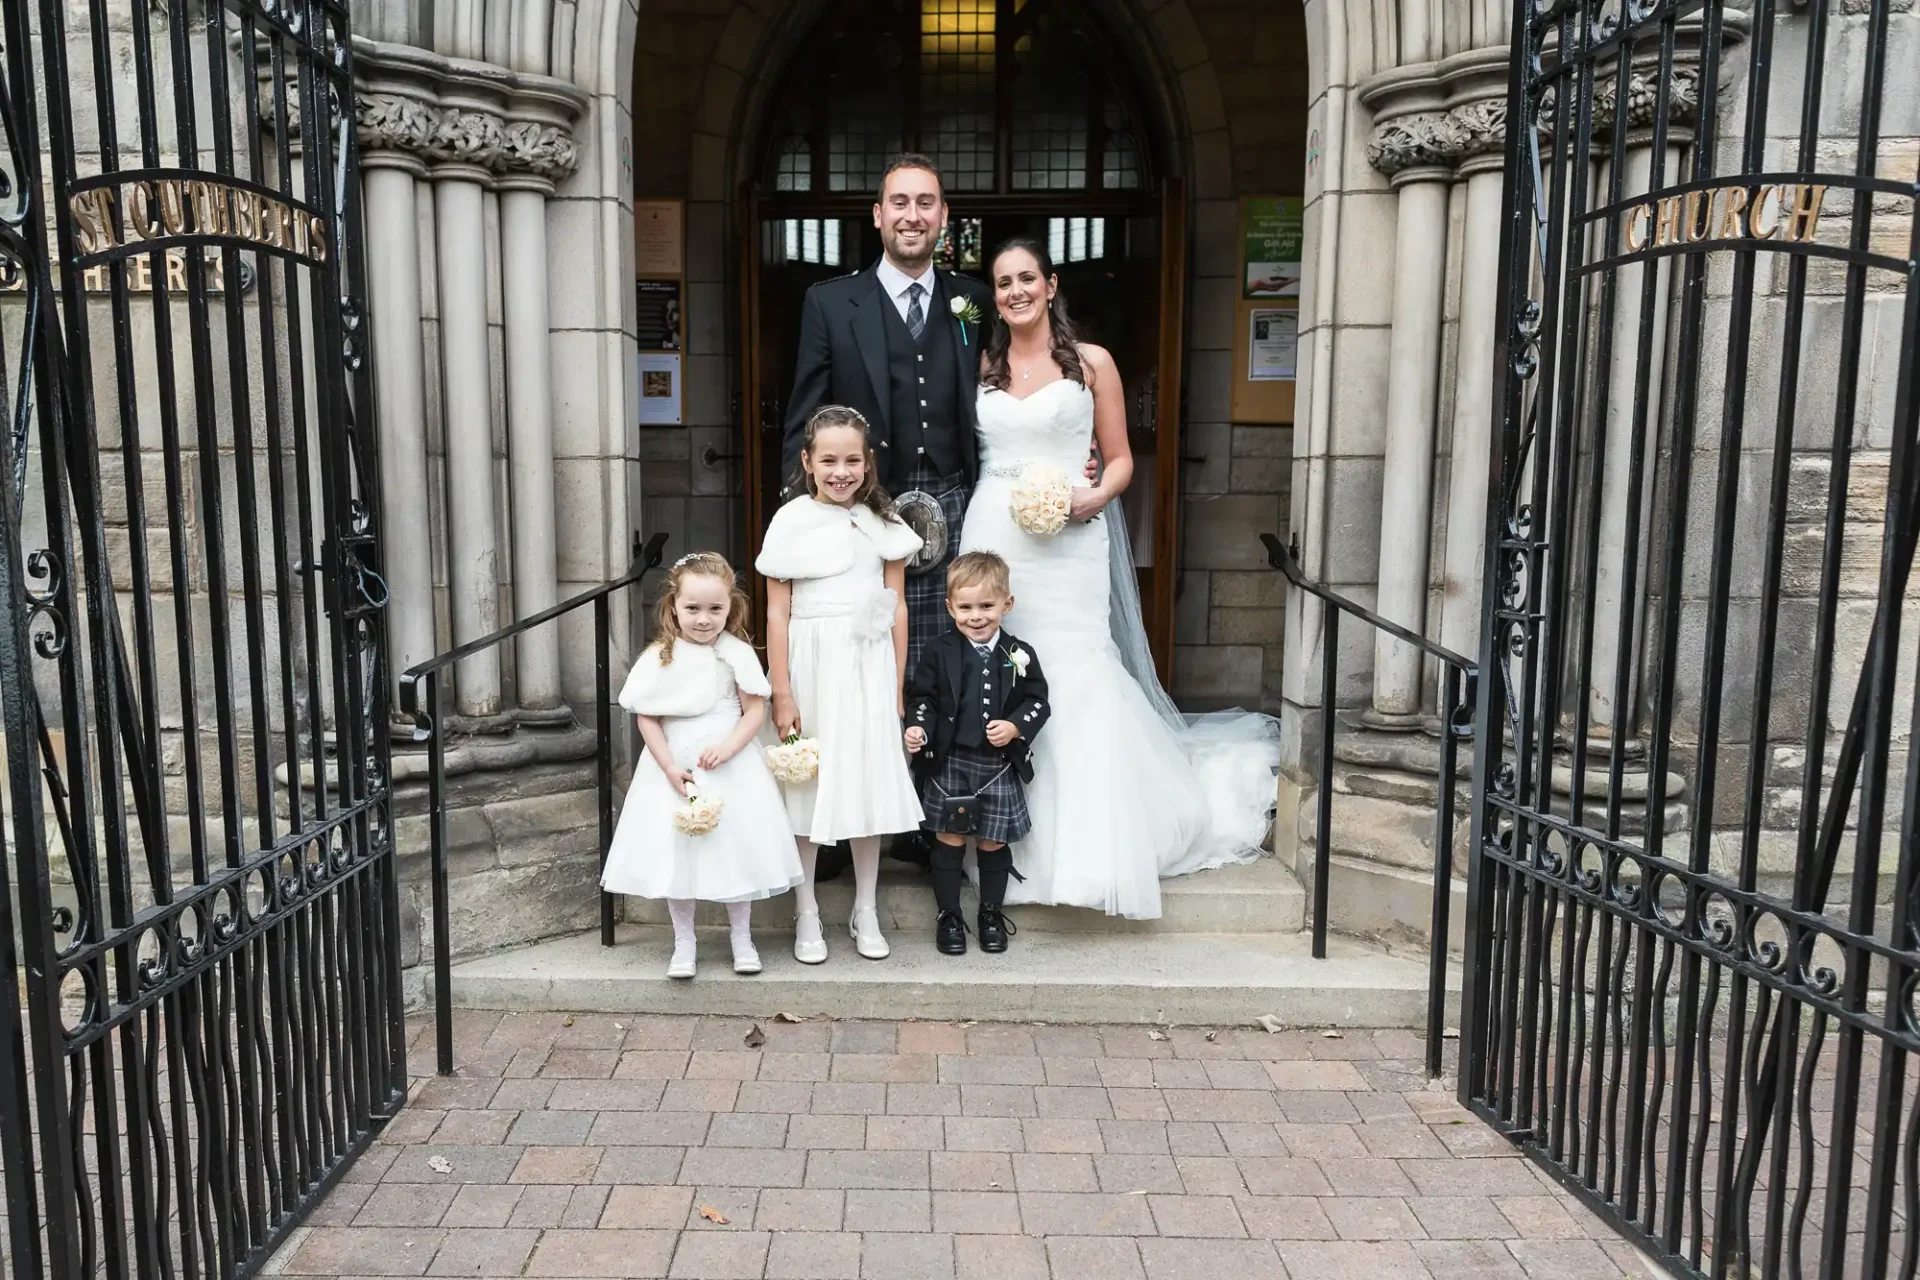 A bride and groom stand smiling with two flower girls and a ring bearer in front of a church entrance, with open wrought-iron gates.